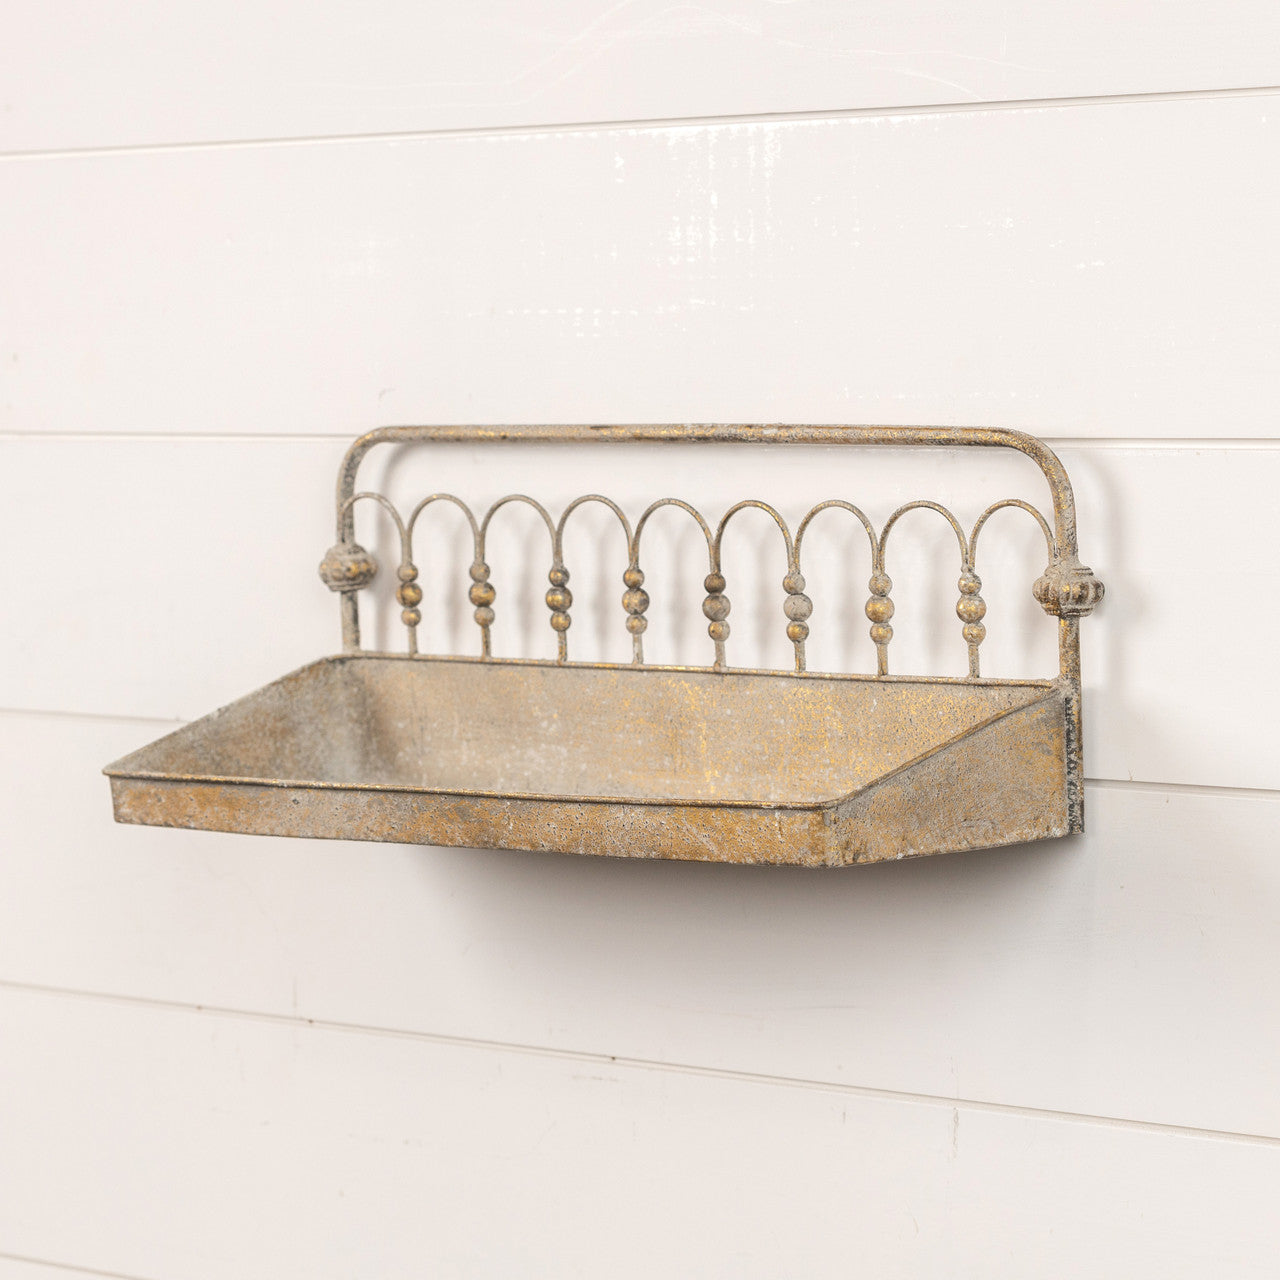 French Inspired Wall Shelf w/ Grate